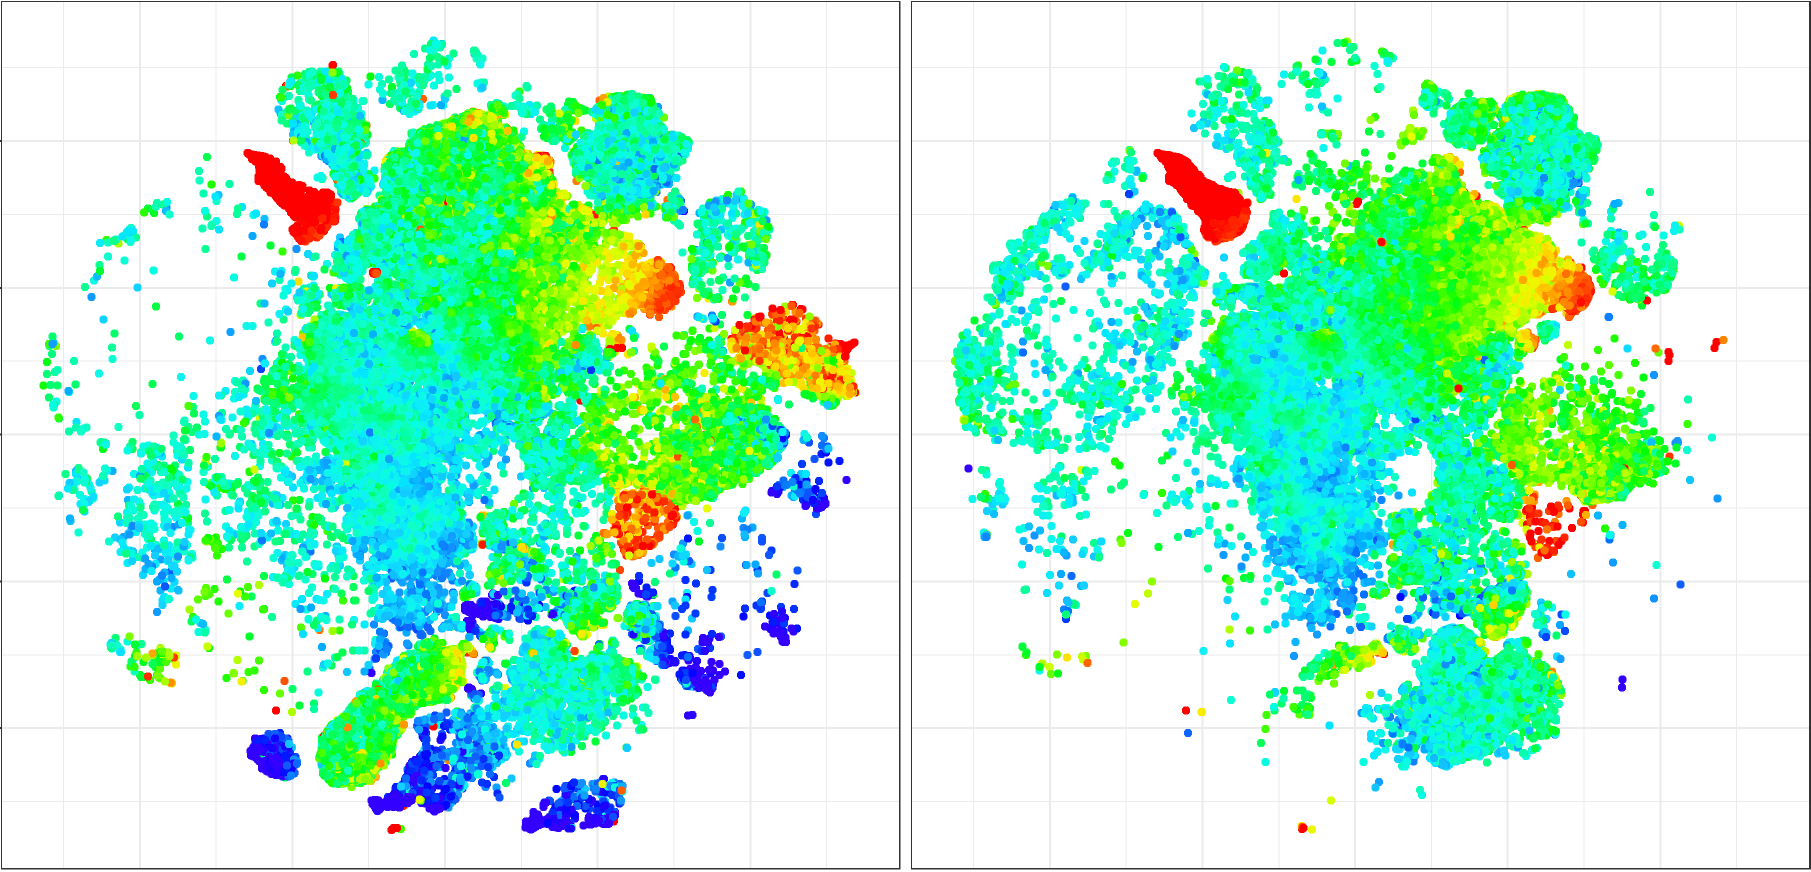 Example of data analysis by clustering